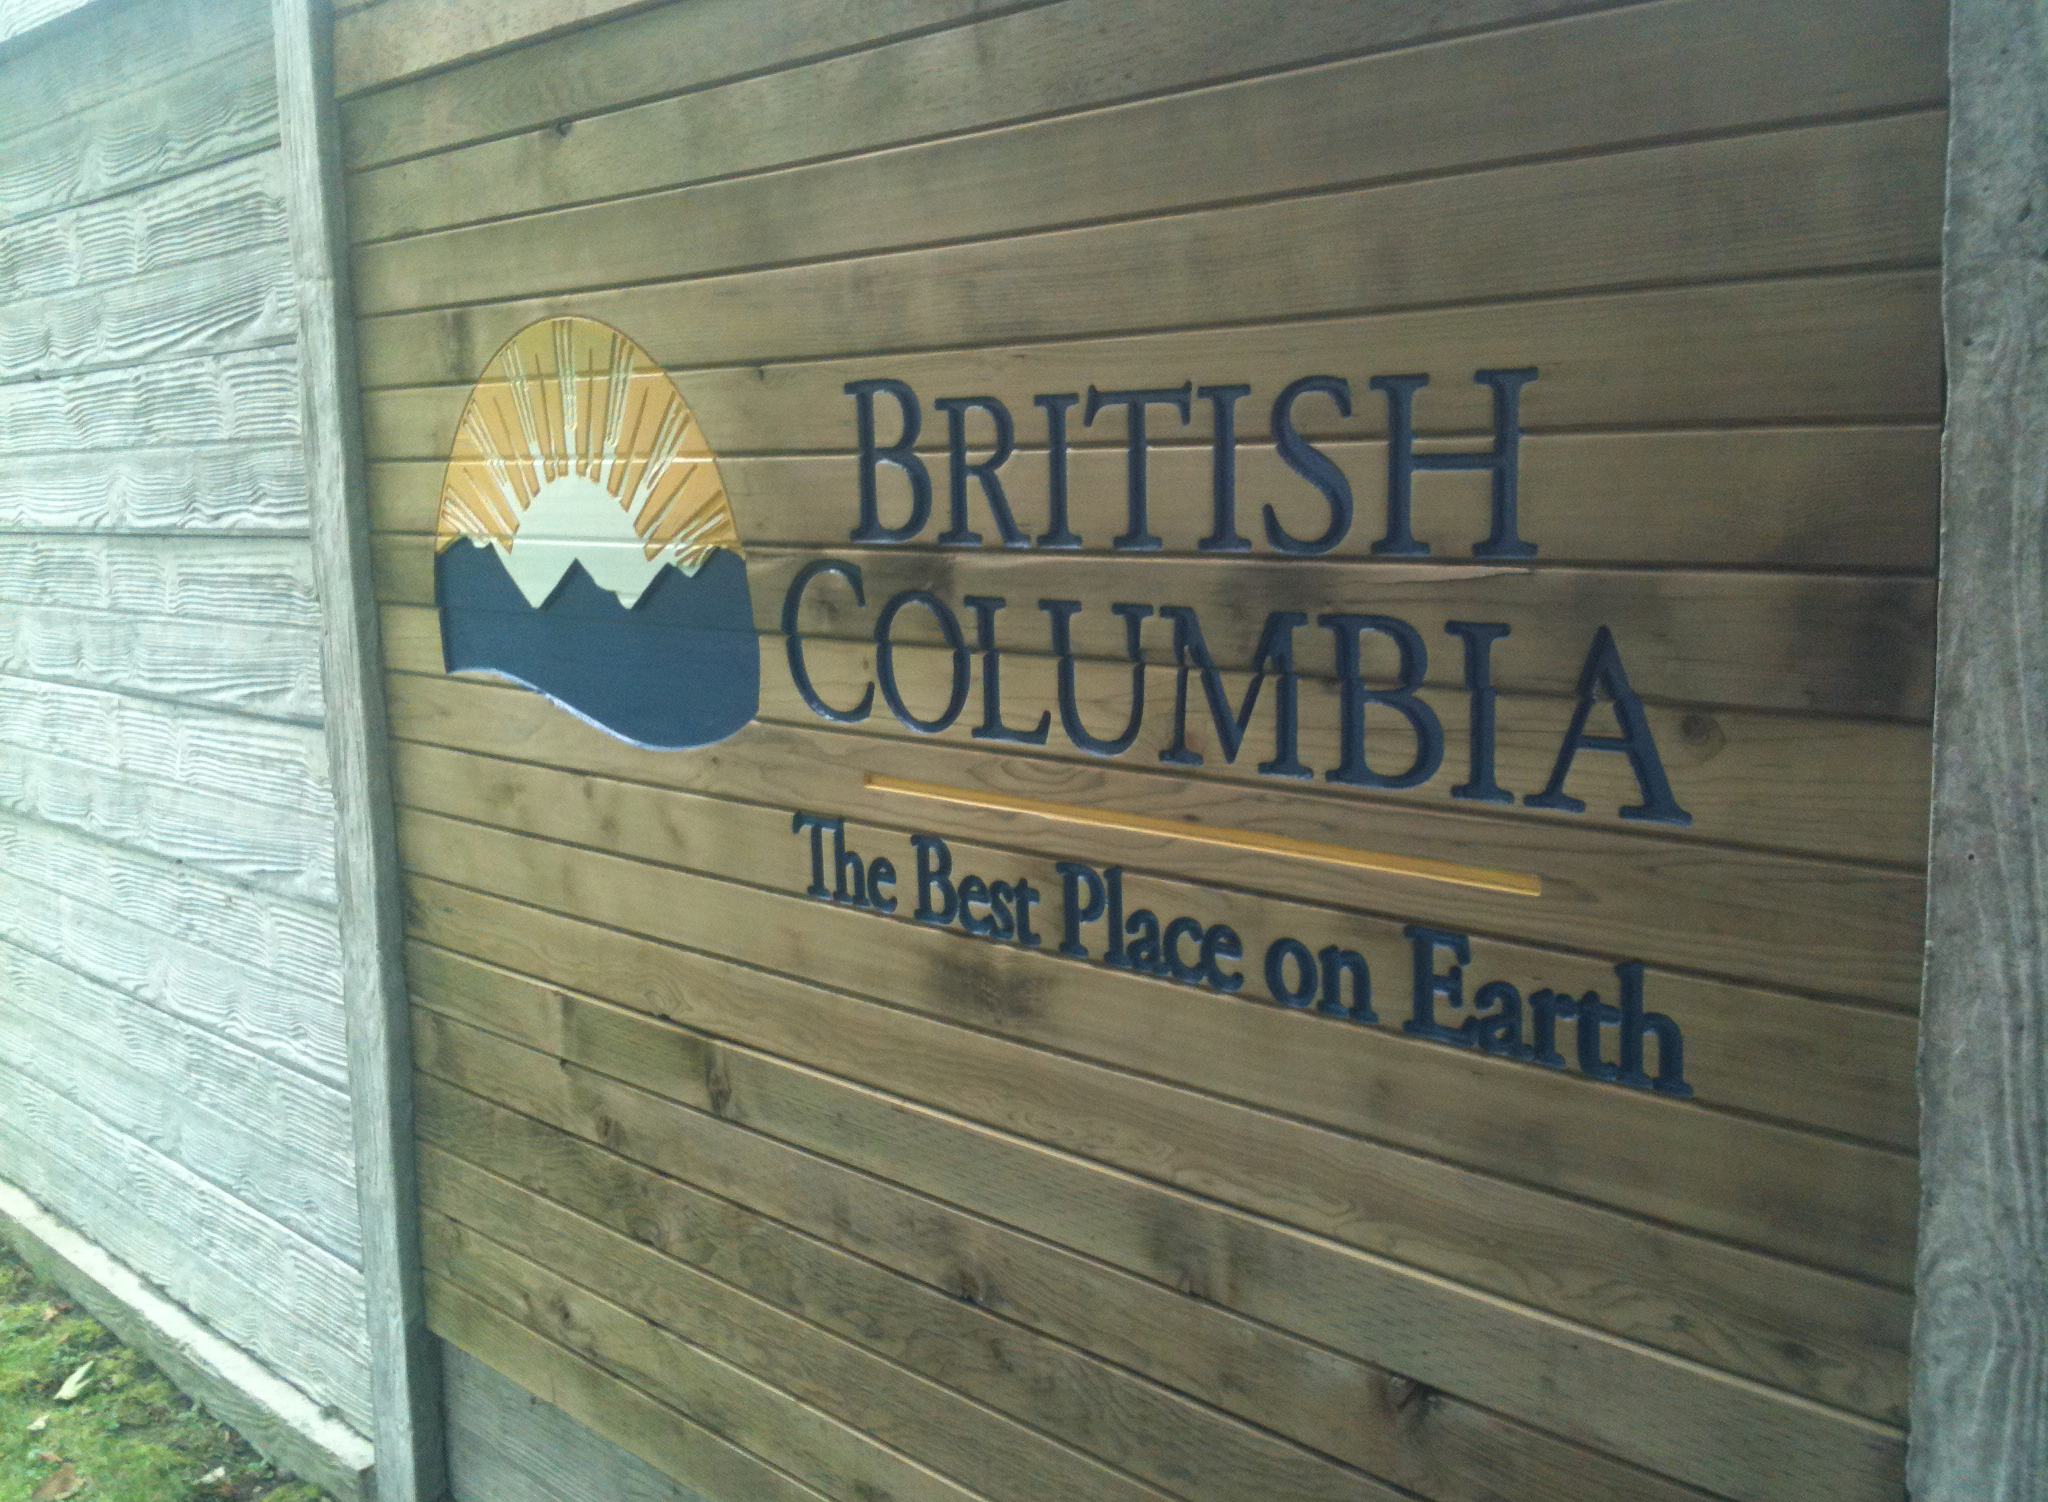 Hem-fir Sound abatement wall that reads "British Columbia - The Best Place on Earth"